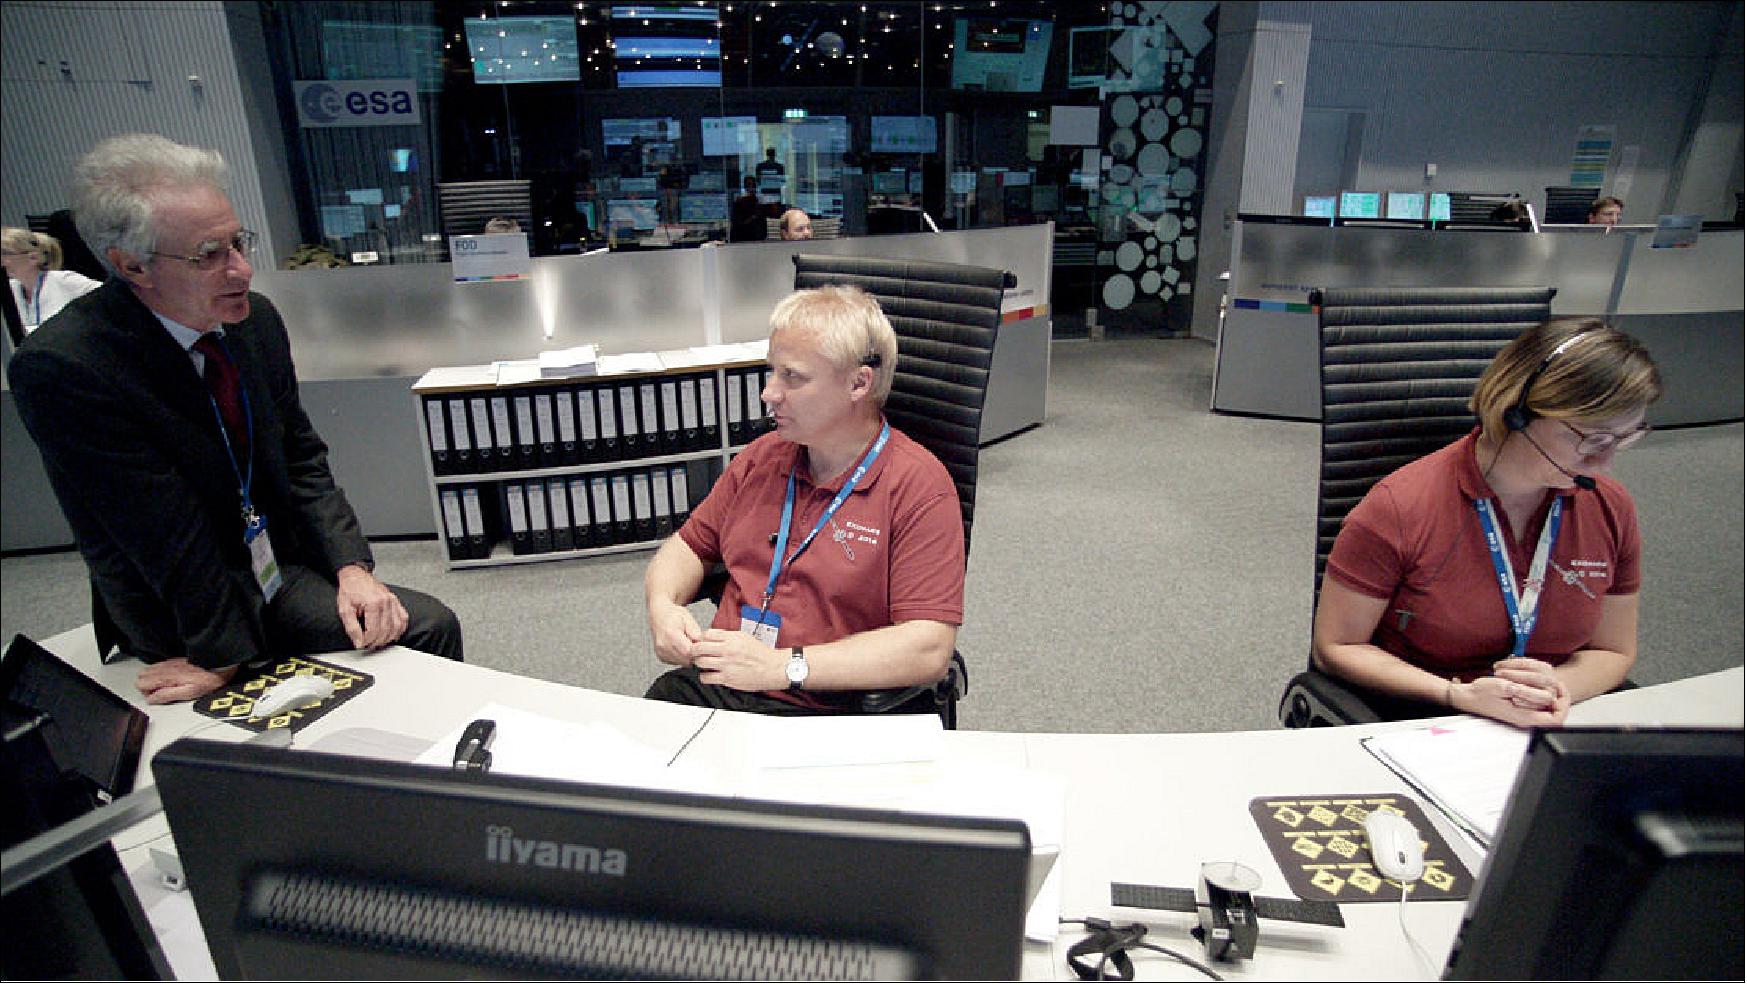 Figure 114: ExoMars Trace Gas Orbiter Spacecraft Operations Manager Peter Schmitz, center, in discussions with ESA’s Head of Mission Operations, Paolo Ferri, at left, during the arrival of TGO at Mars on 19 October 2016. Deputy Spacecraft Operations Manager Silvia Sangiorgi is working at the console at right (image credit: ESA, P. Shlyaev)